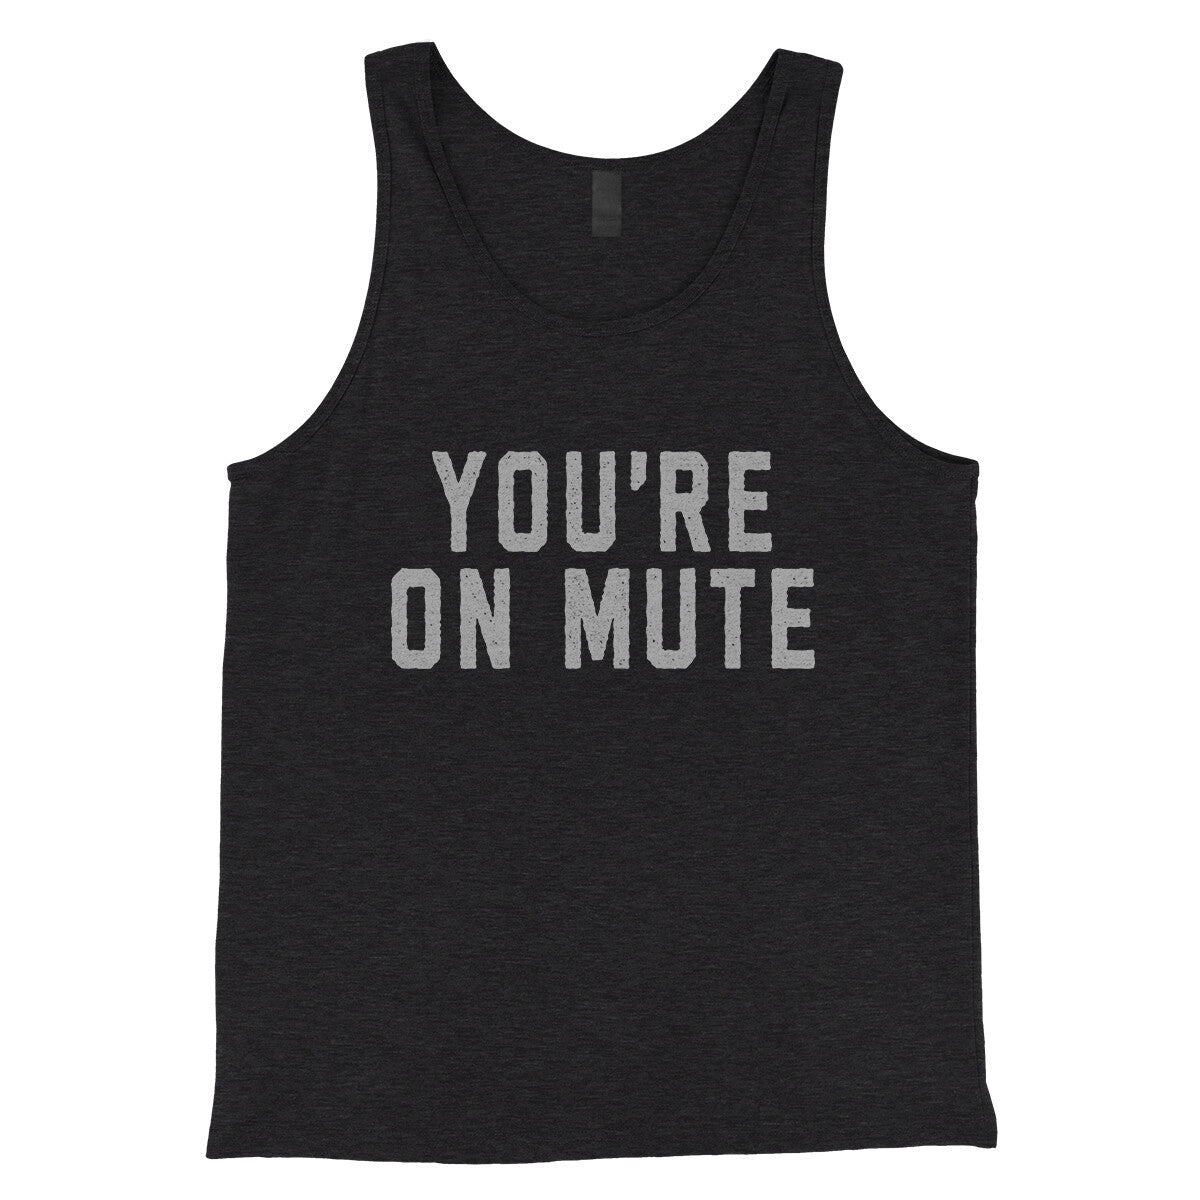 You're on Mute in Charcoal Black TriBlend Color